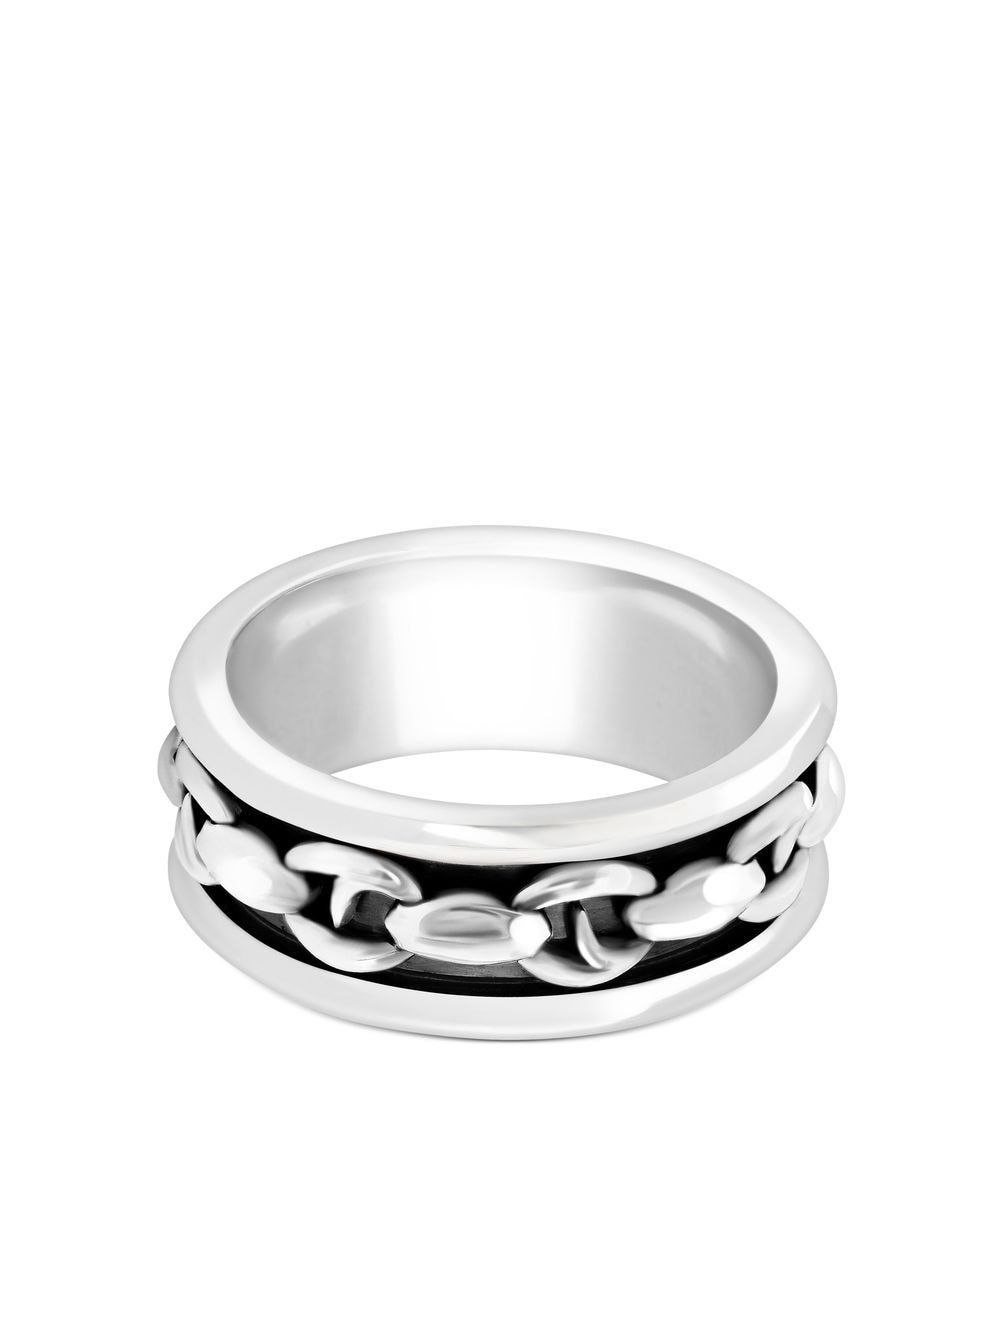 Classic sterling-silver spinning band